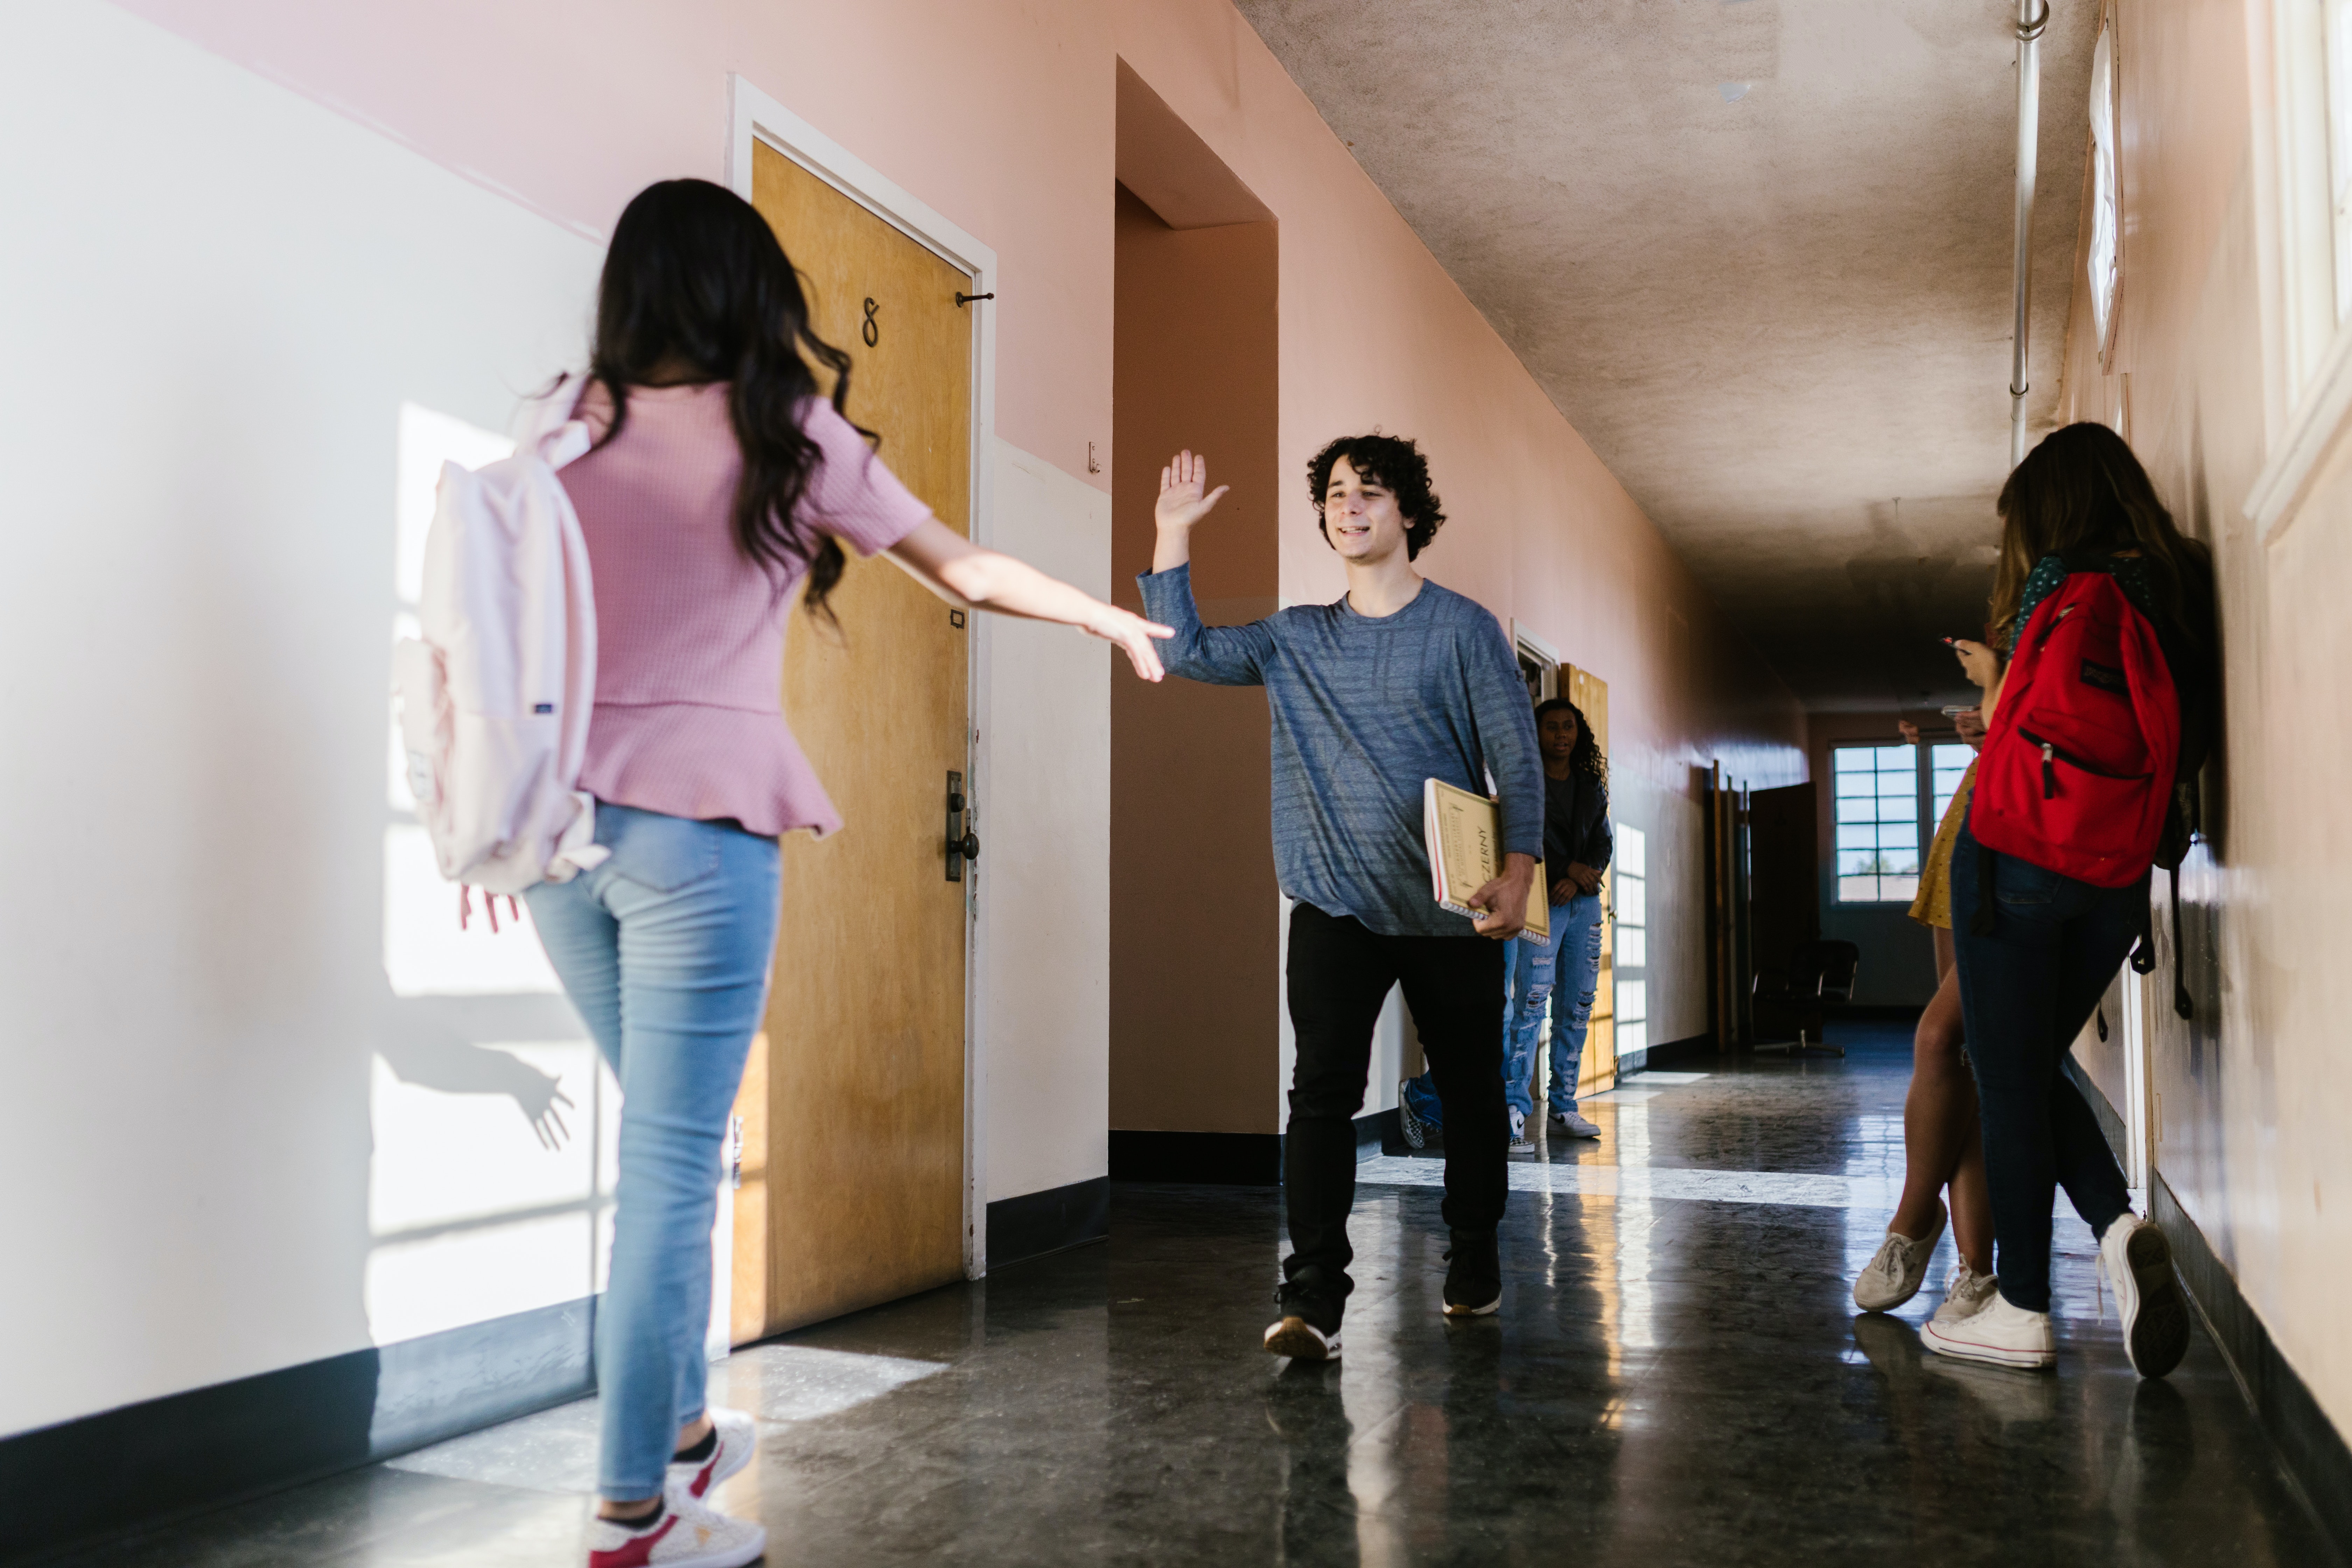 3 WAYS AN AUTOMATED SECURITY SYSTEM PROTECTS YOUR SCHOOL